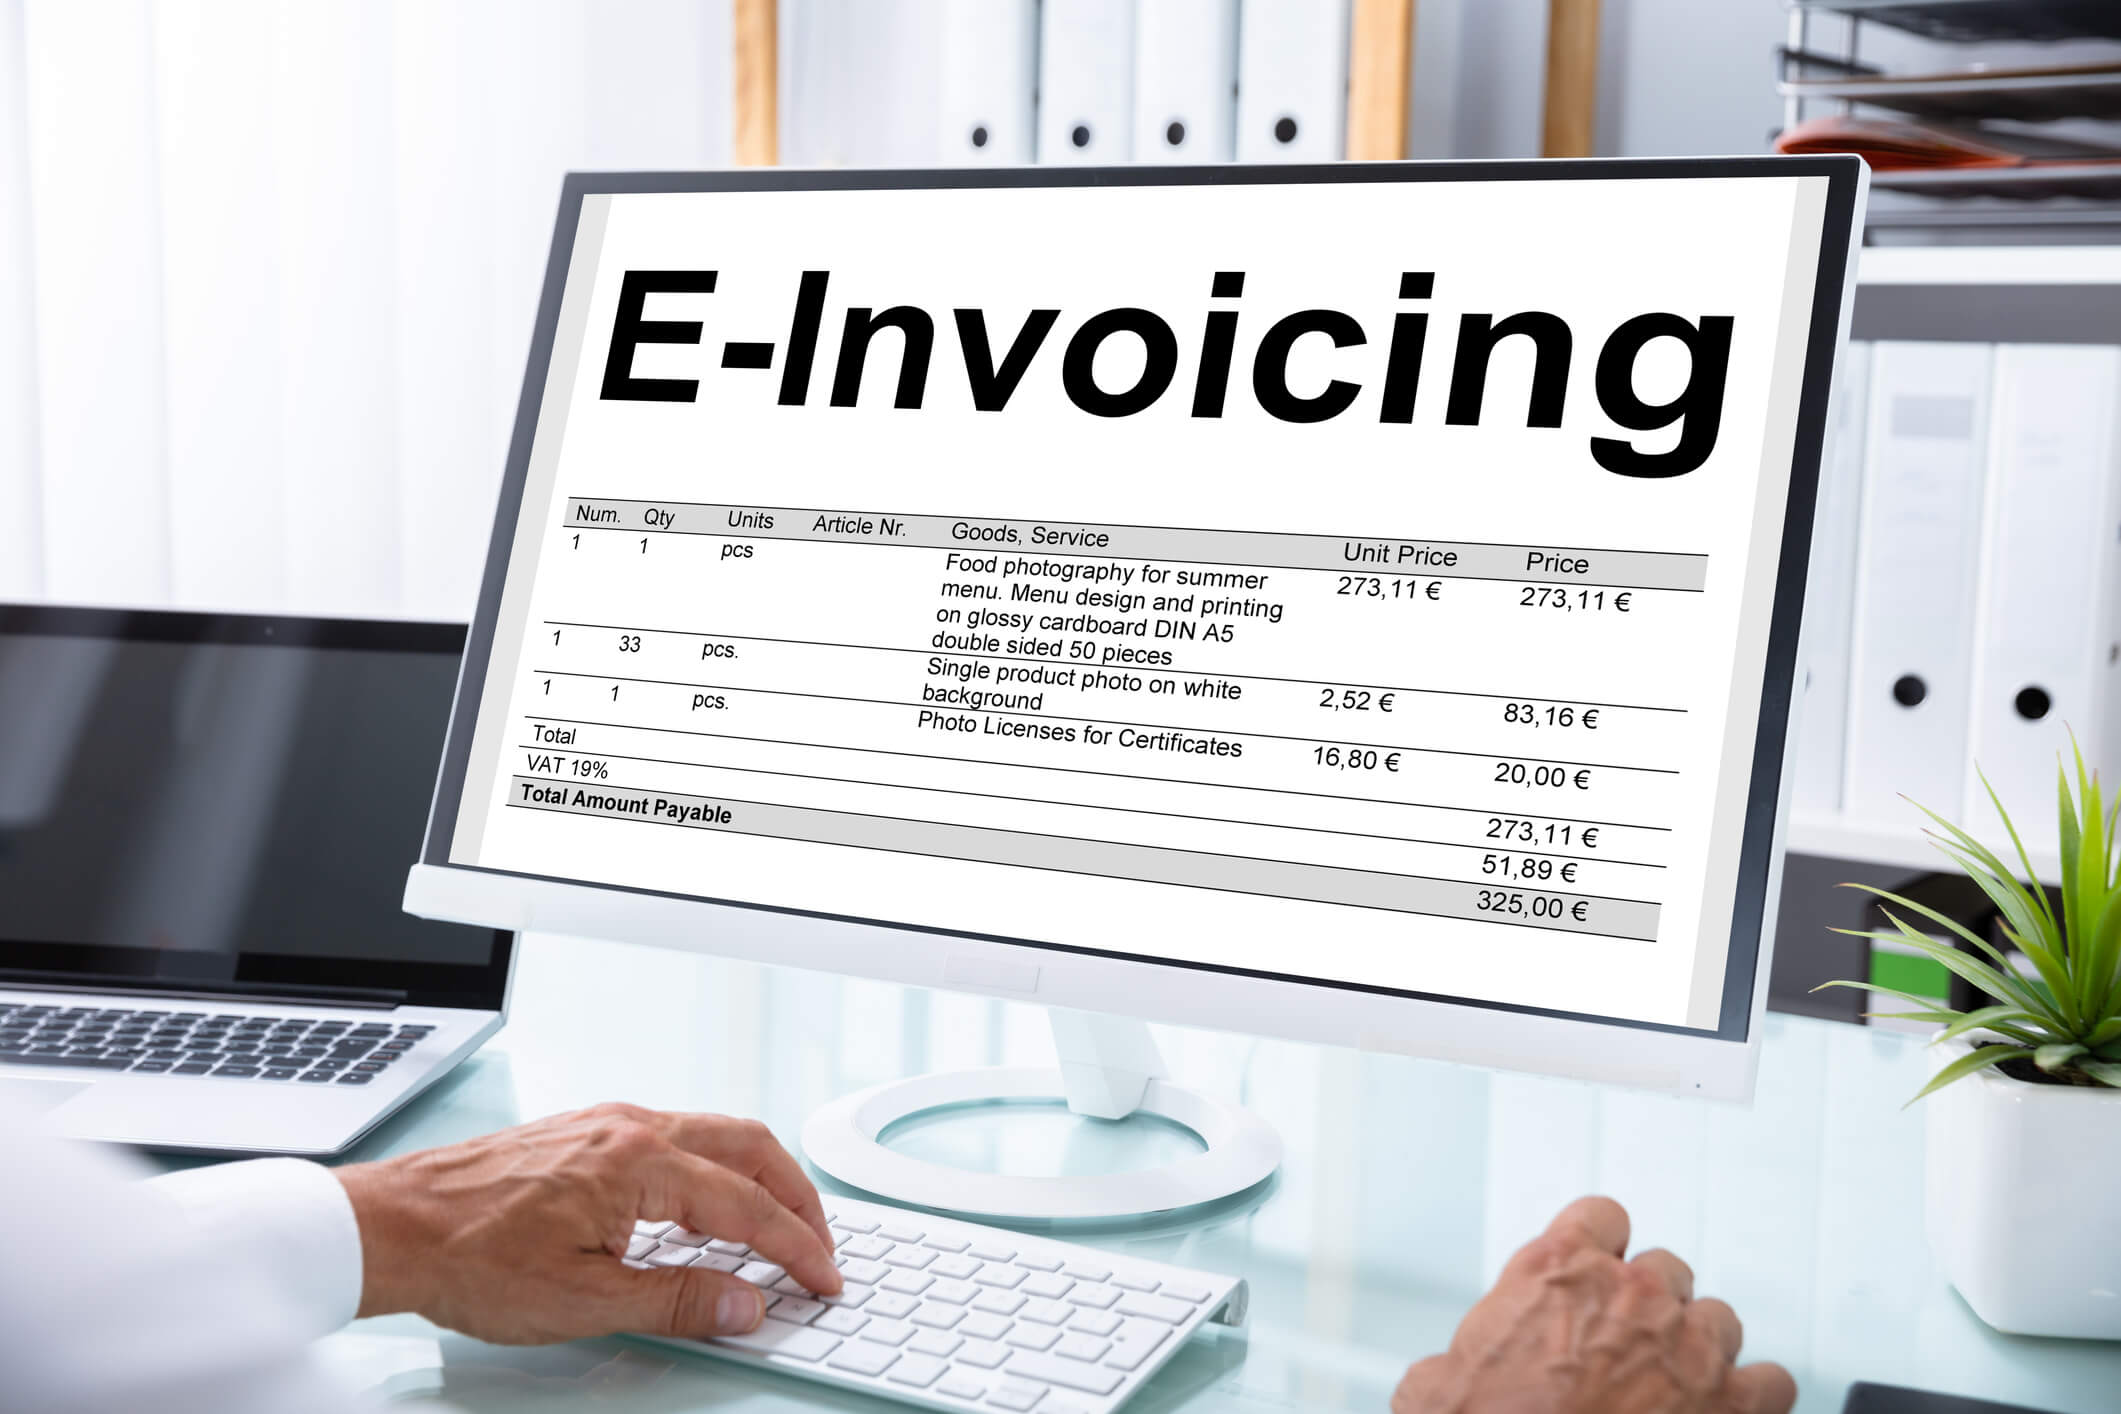 invoicing and billing software